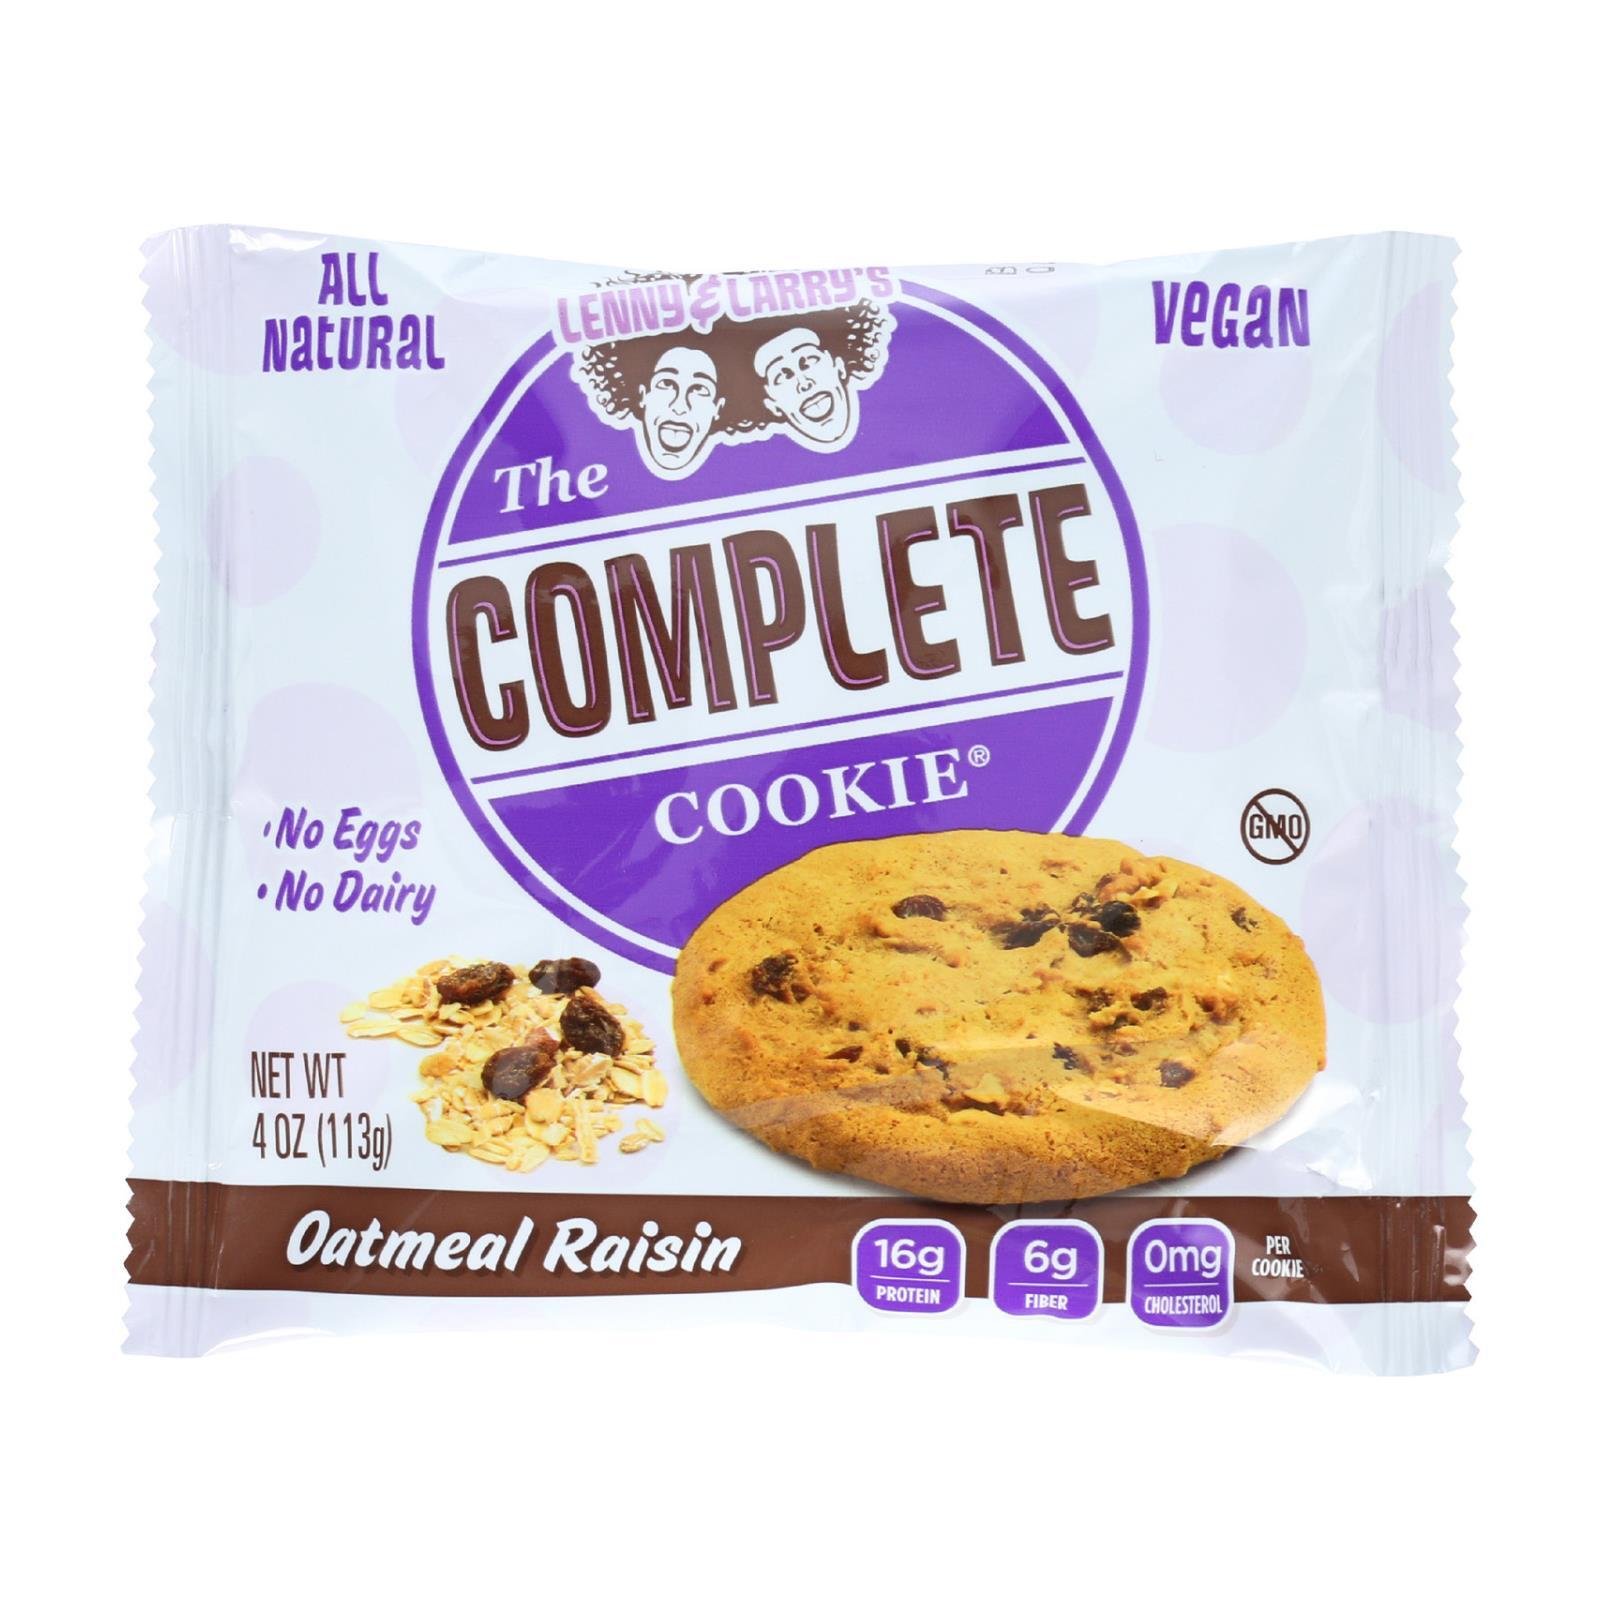 Complete cookie. Oatmeal cookie Packaging. Cookies Raisin Lemon Oatmeal cookie. Oatmeal cookies in a package. Larry and. Cookies.